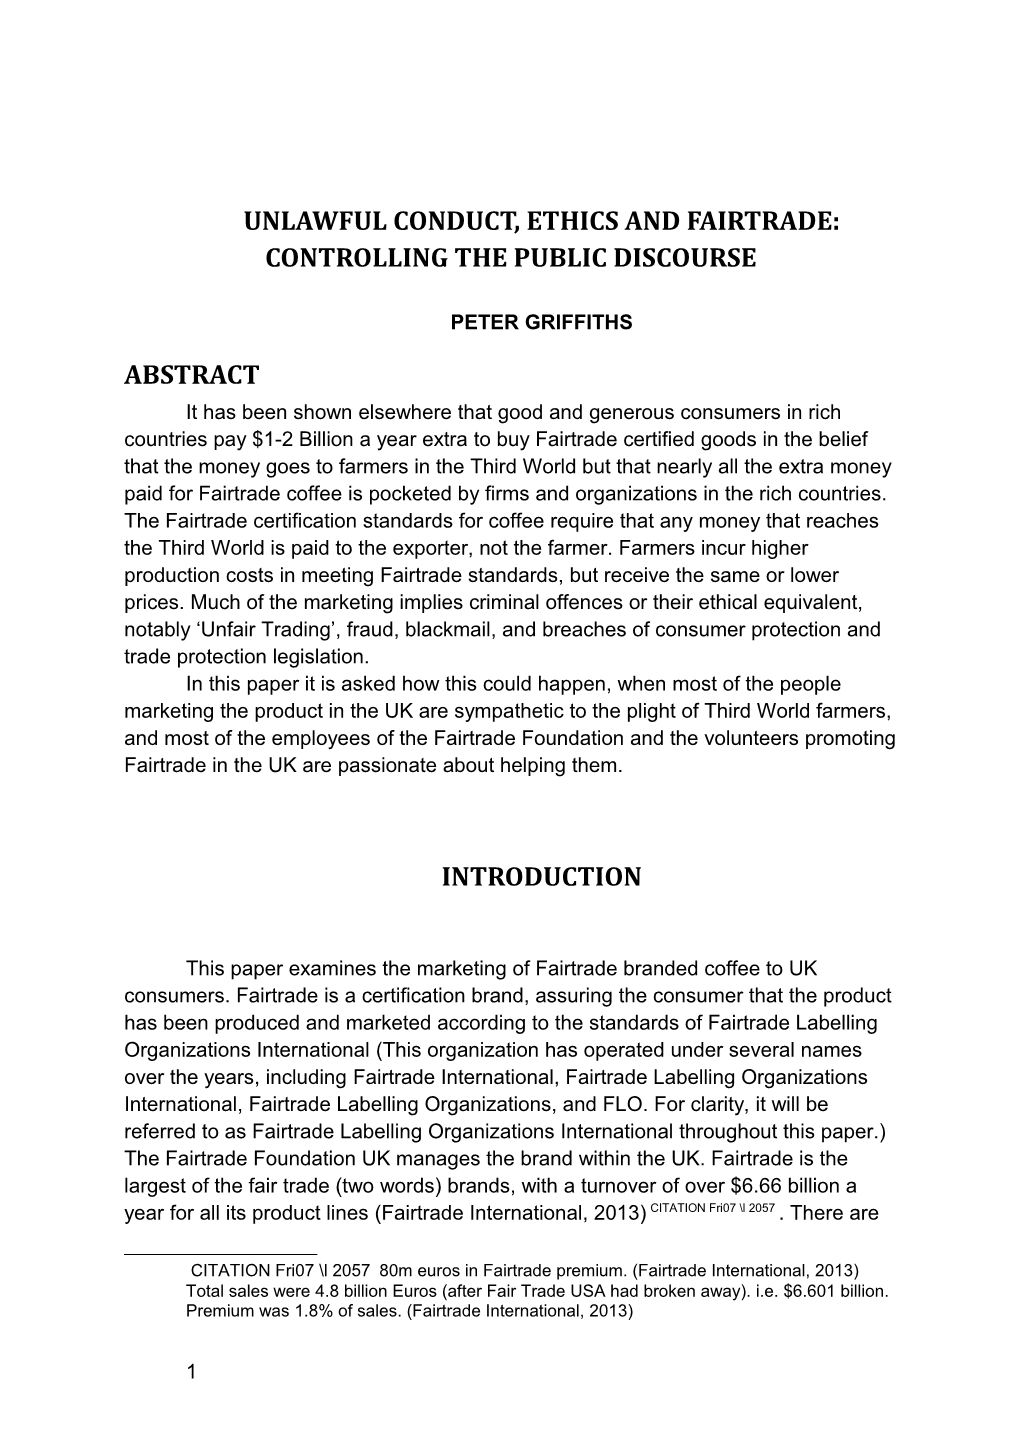 Unlawful Conduct, Ethics and Fairtrade: Controlling the Public Discourse